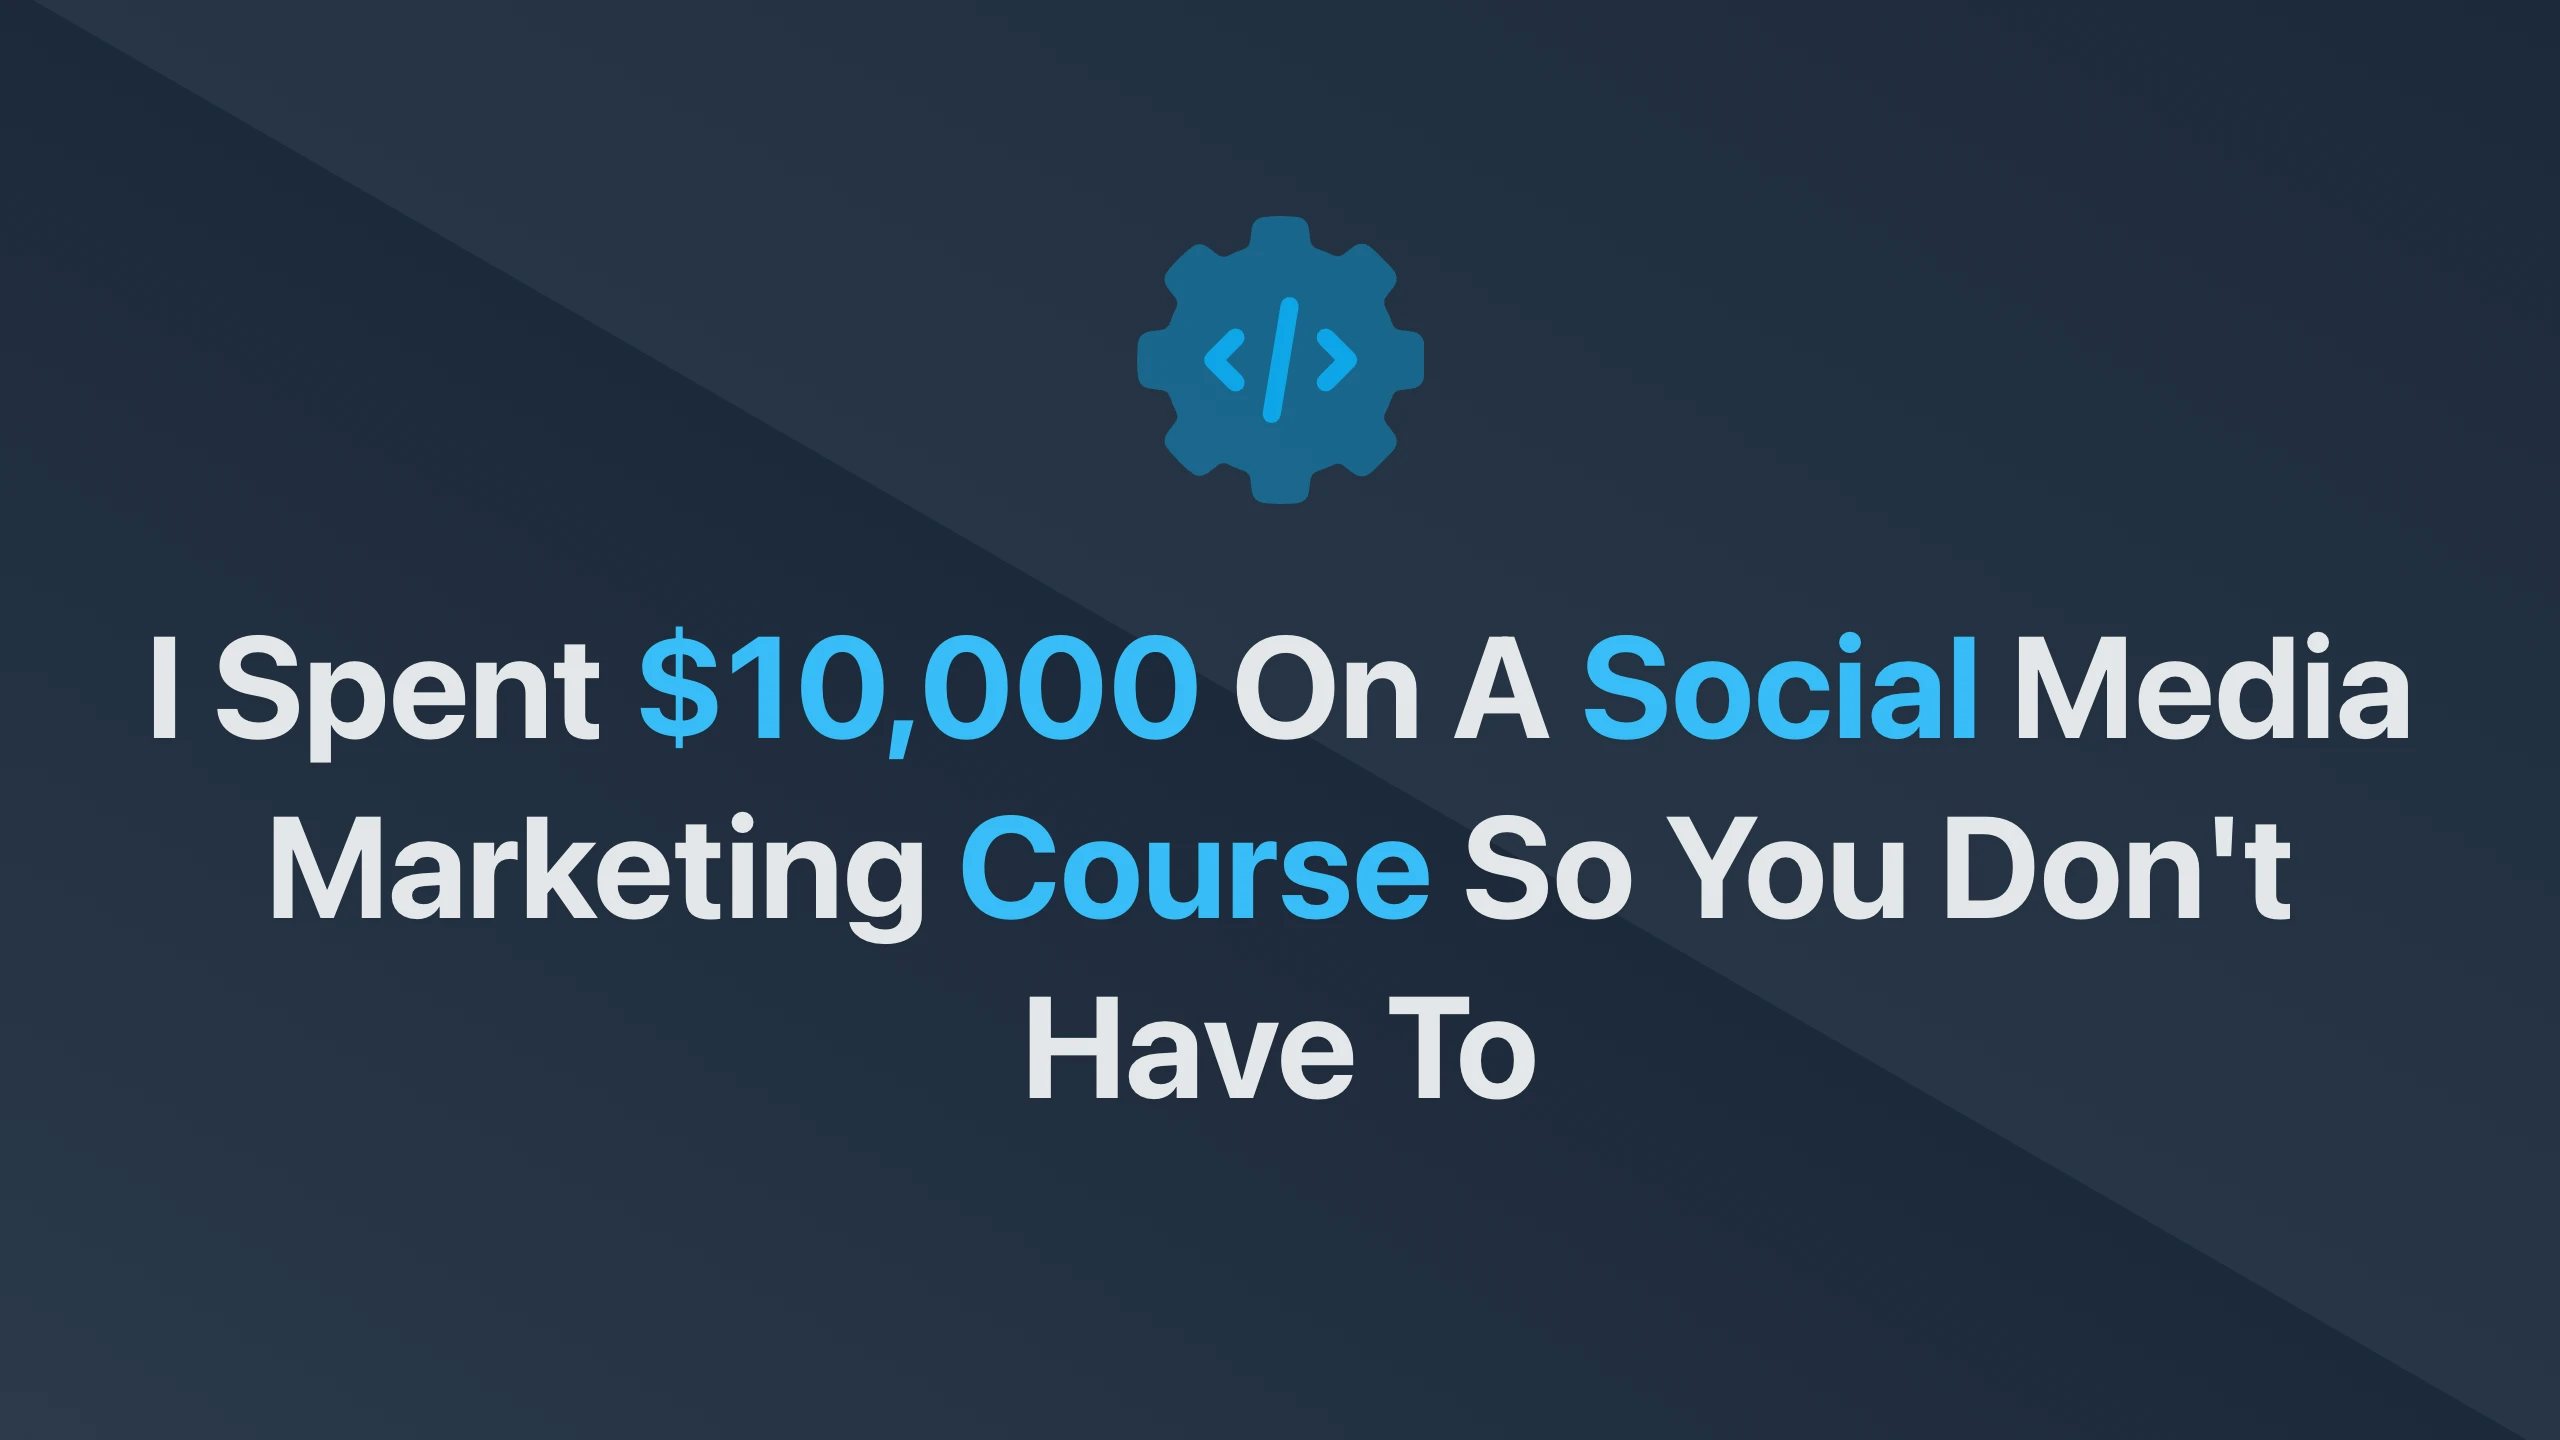 Cover Image for I Spent $10,000 on a Social Media Marketing Course So You Don't Have To